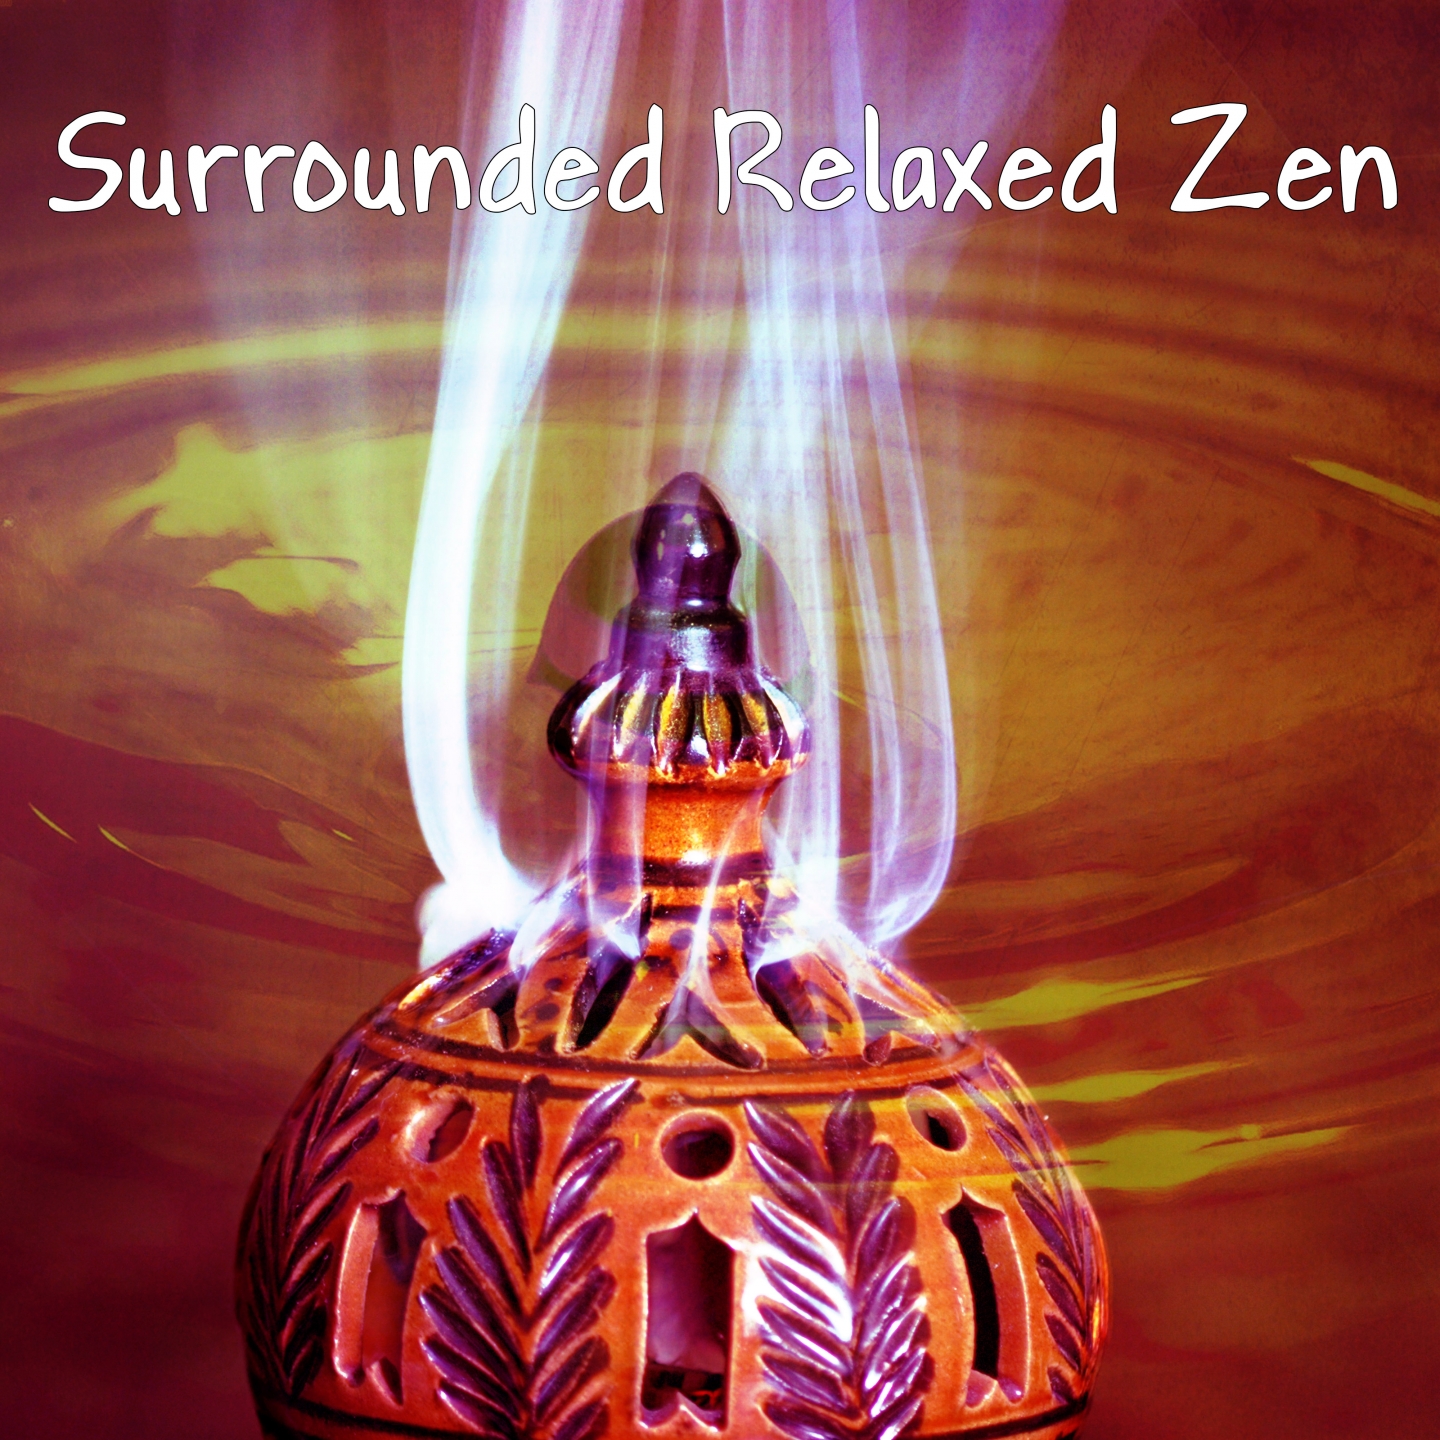 Surrounded Relaxed Zen